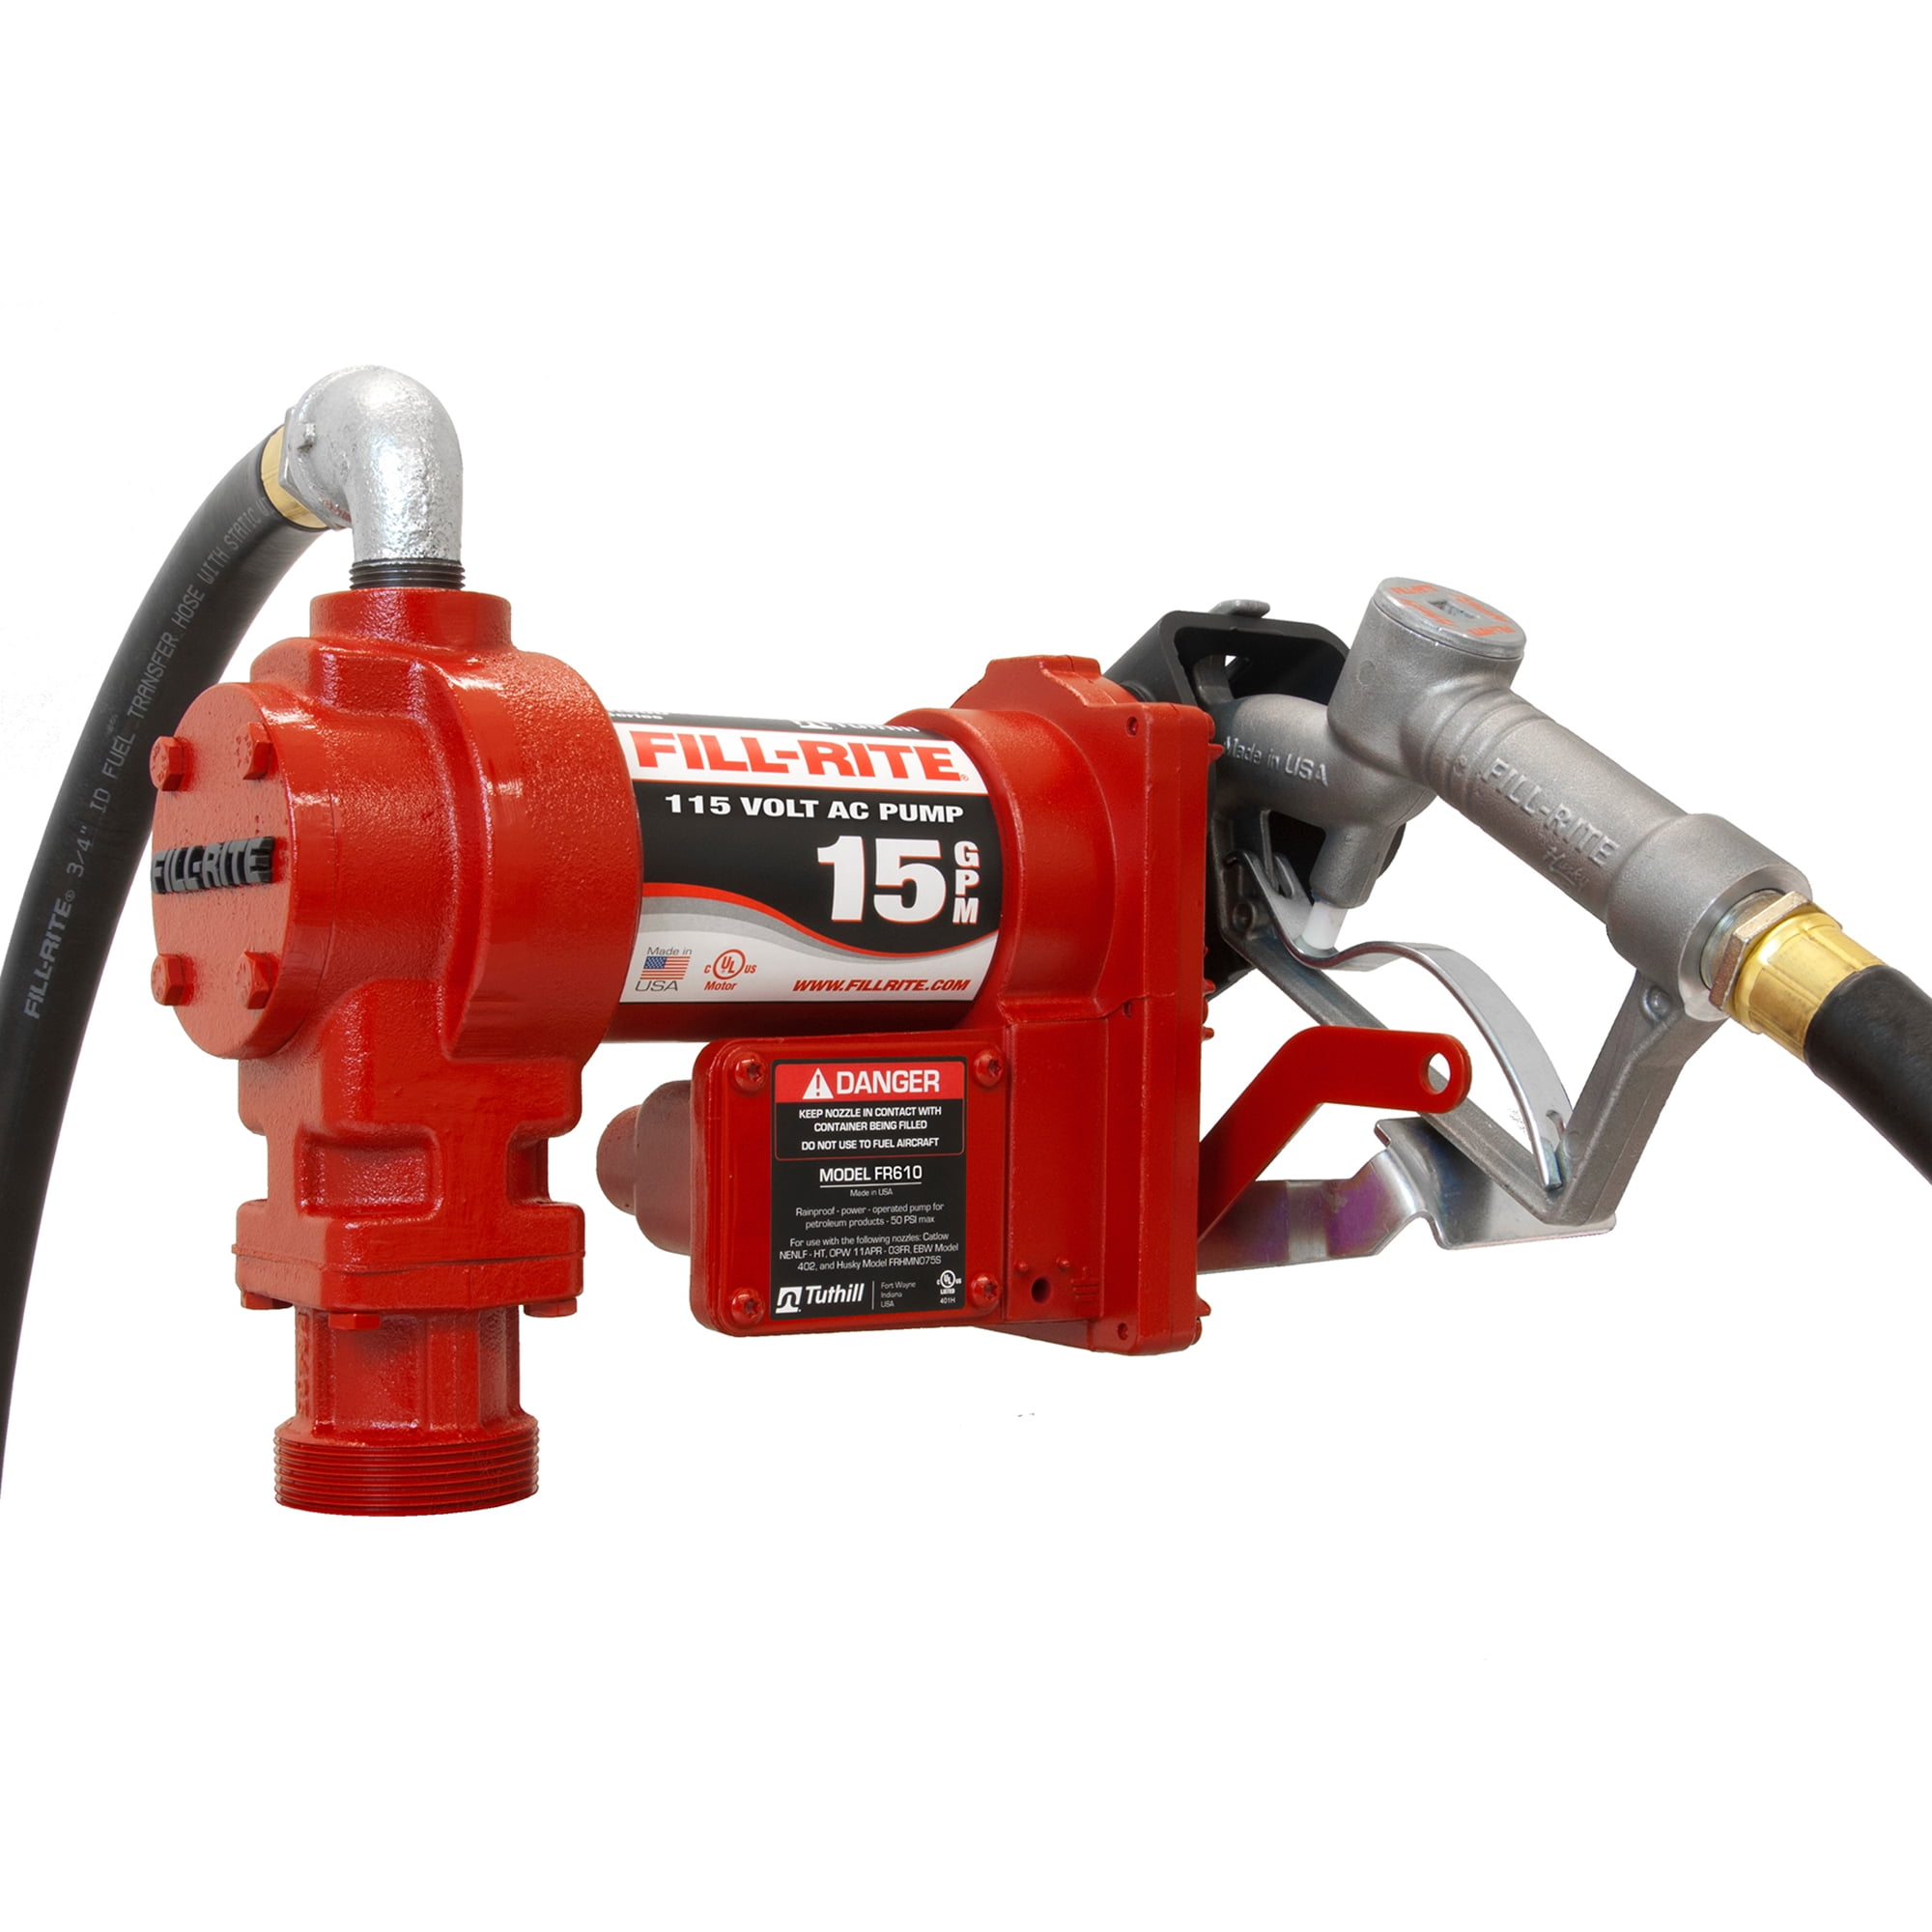 Suction Pipe Discharge Hose Fill-Rite FR610G 115V 15 GPM Fuel Transfer Pump w/Manual Nozzle 